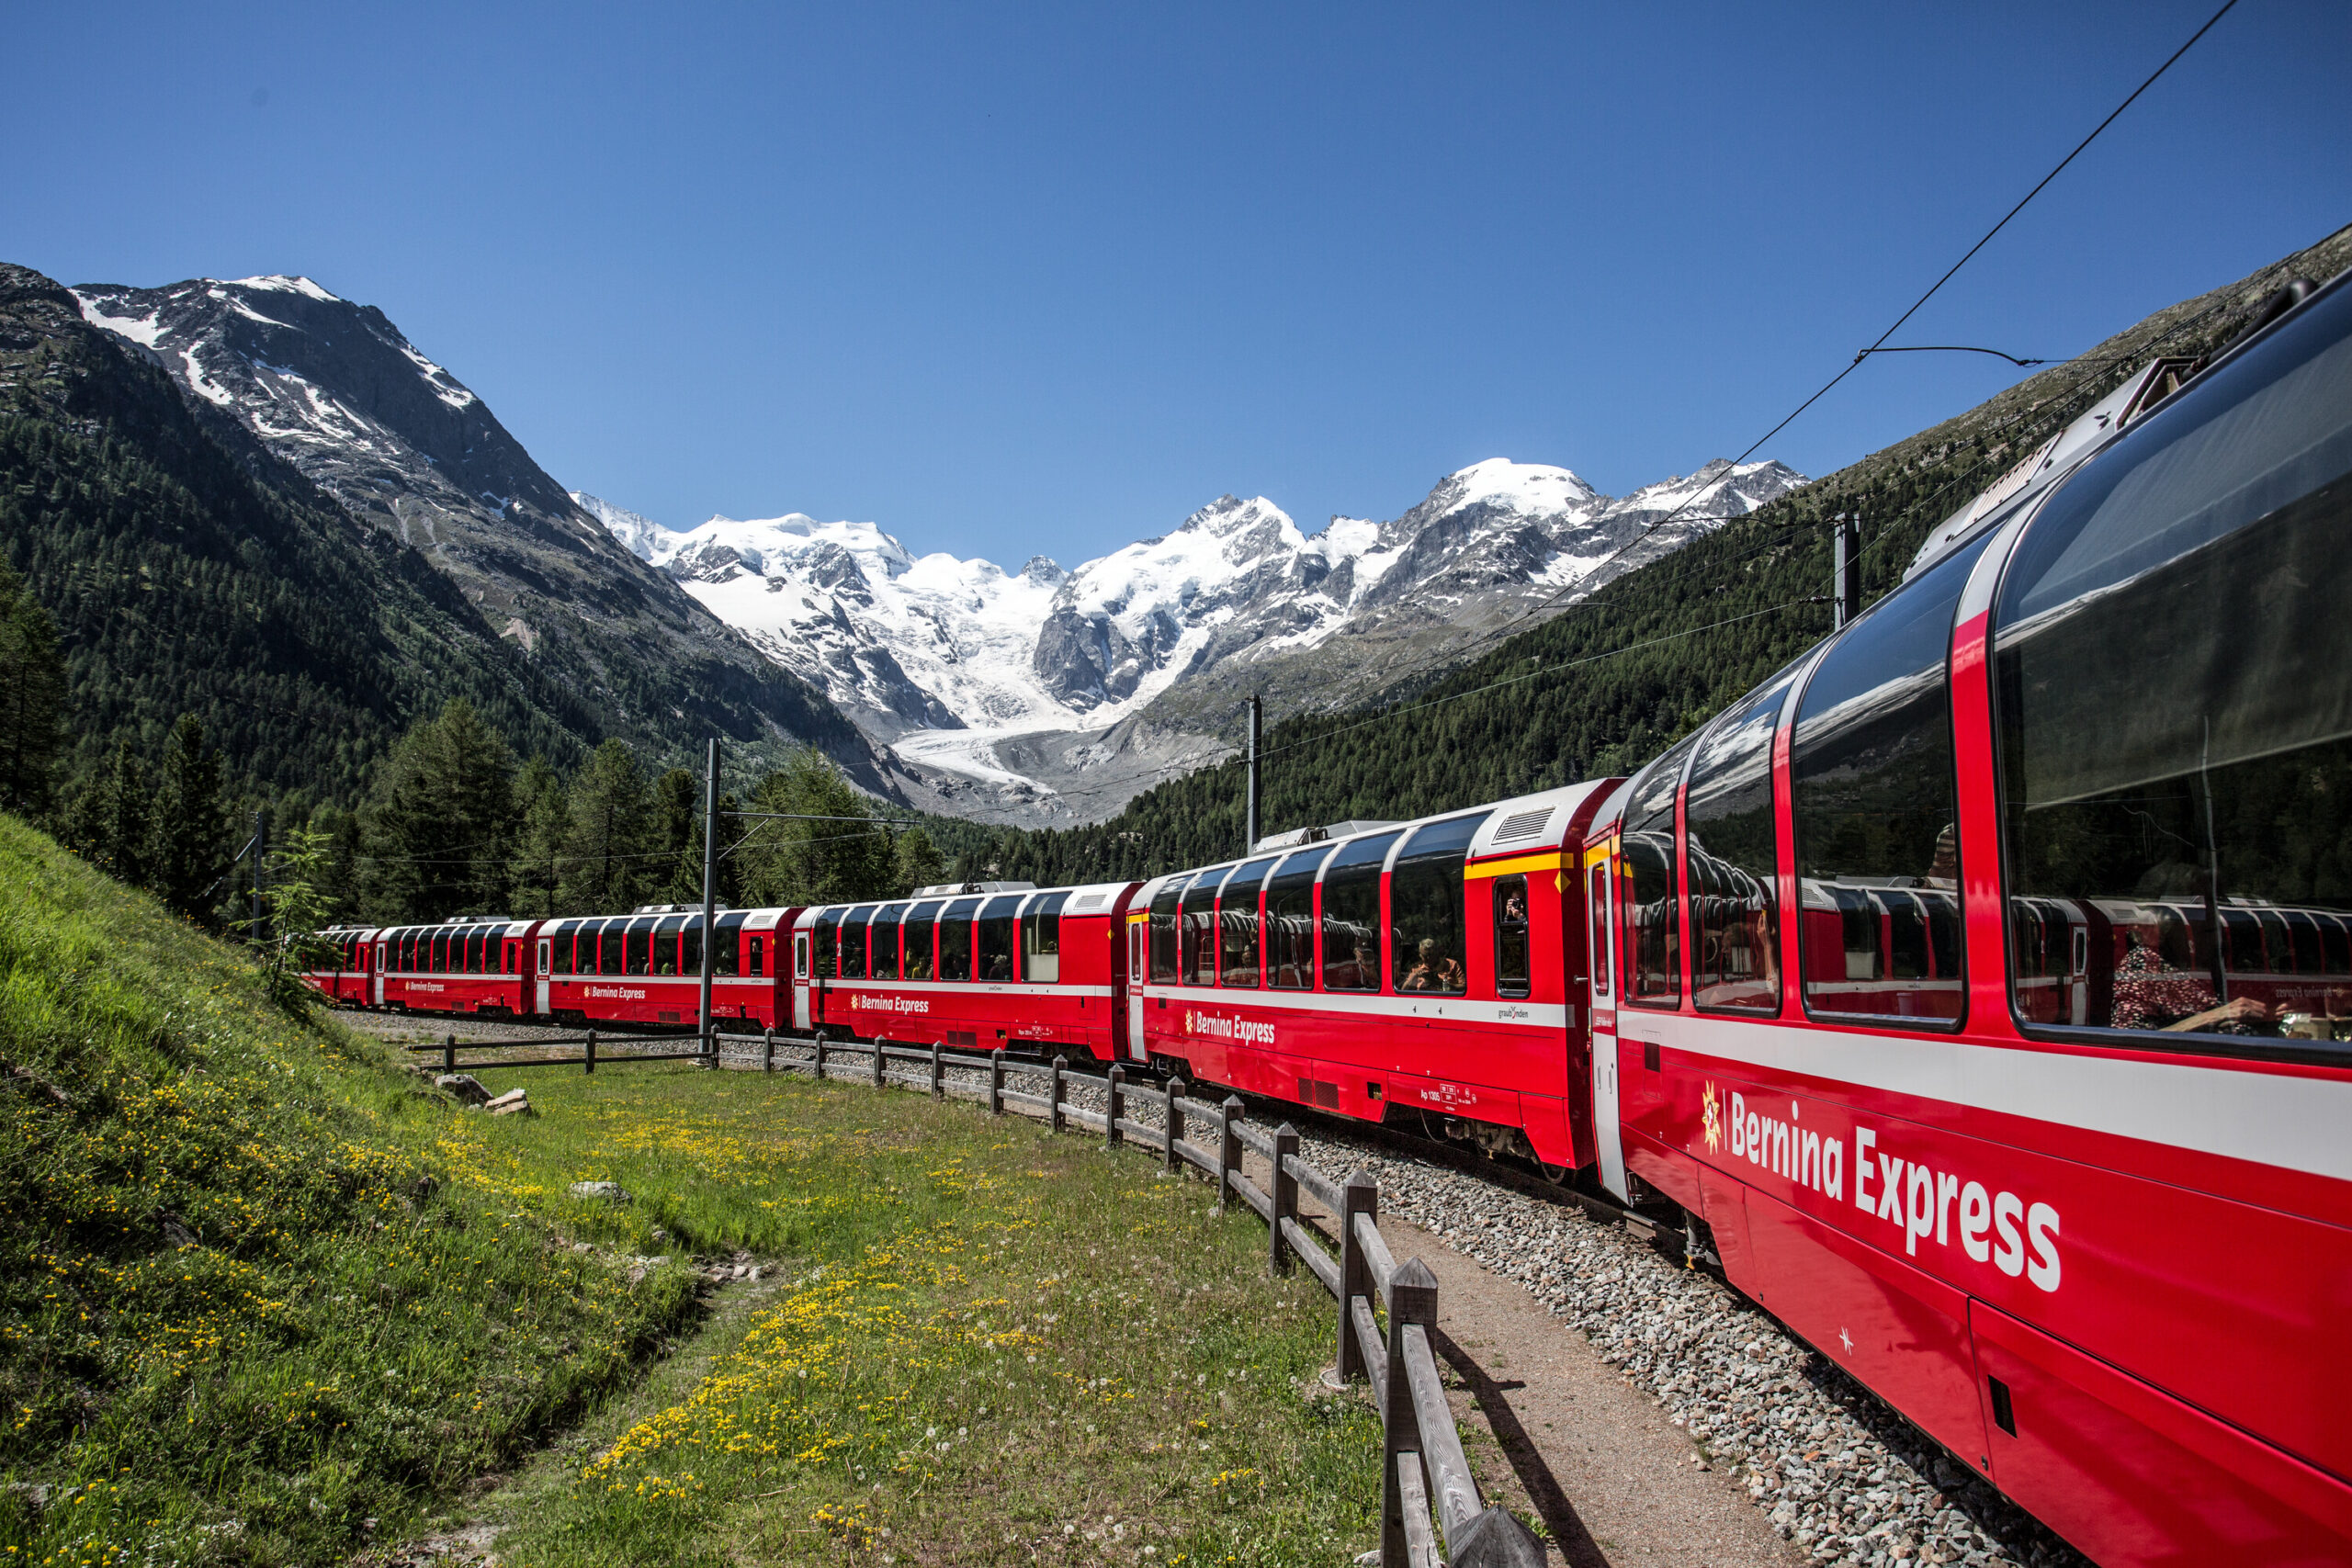 India emerges as a very important market for Rhaetian Railway